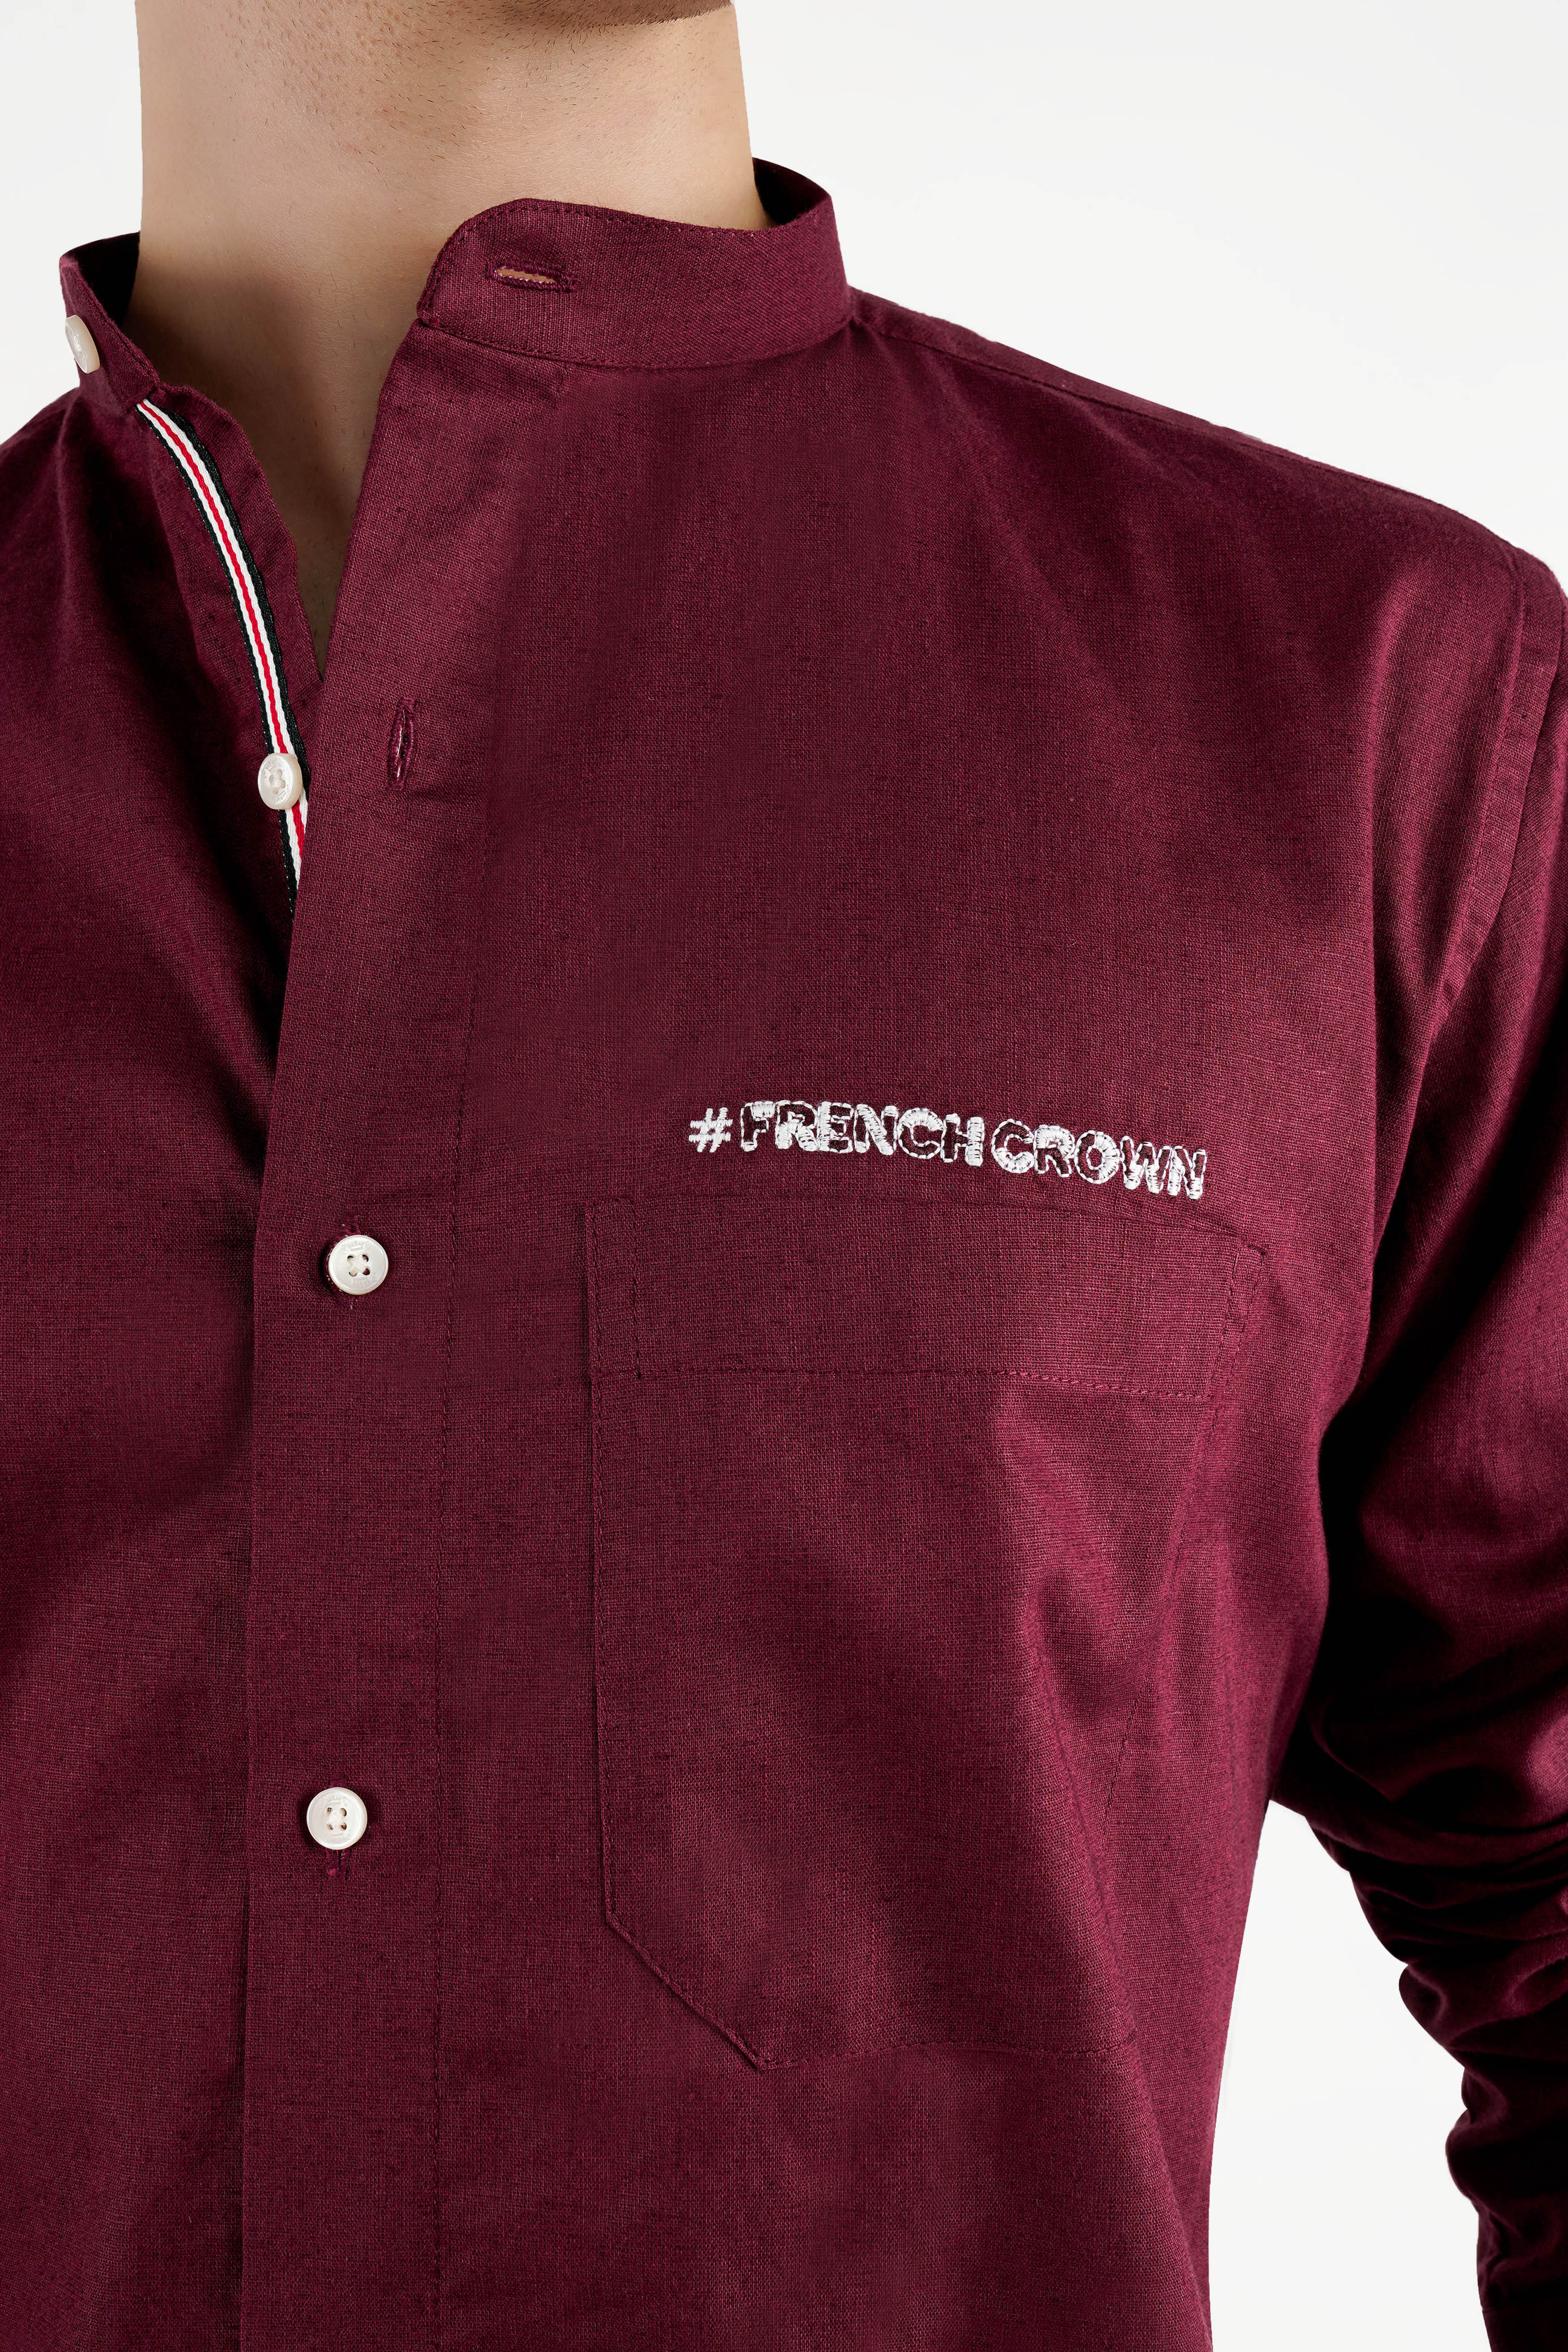 Cocoa Bean Maroon with French Crown Signature Embroidered Luxurious Linen Designer Shirt